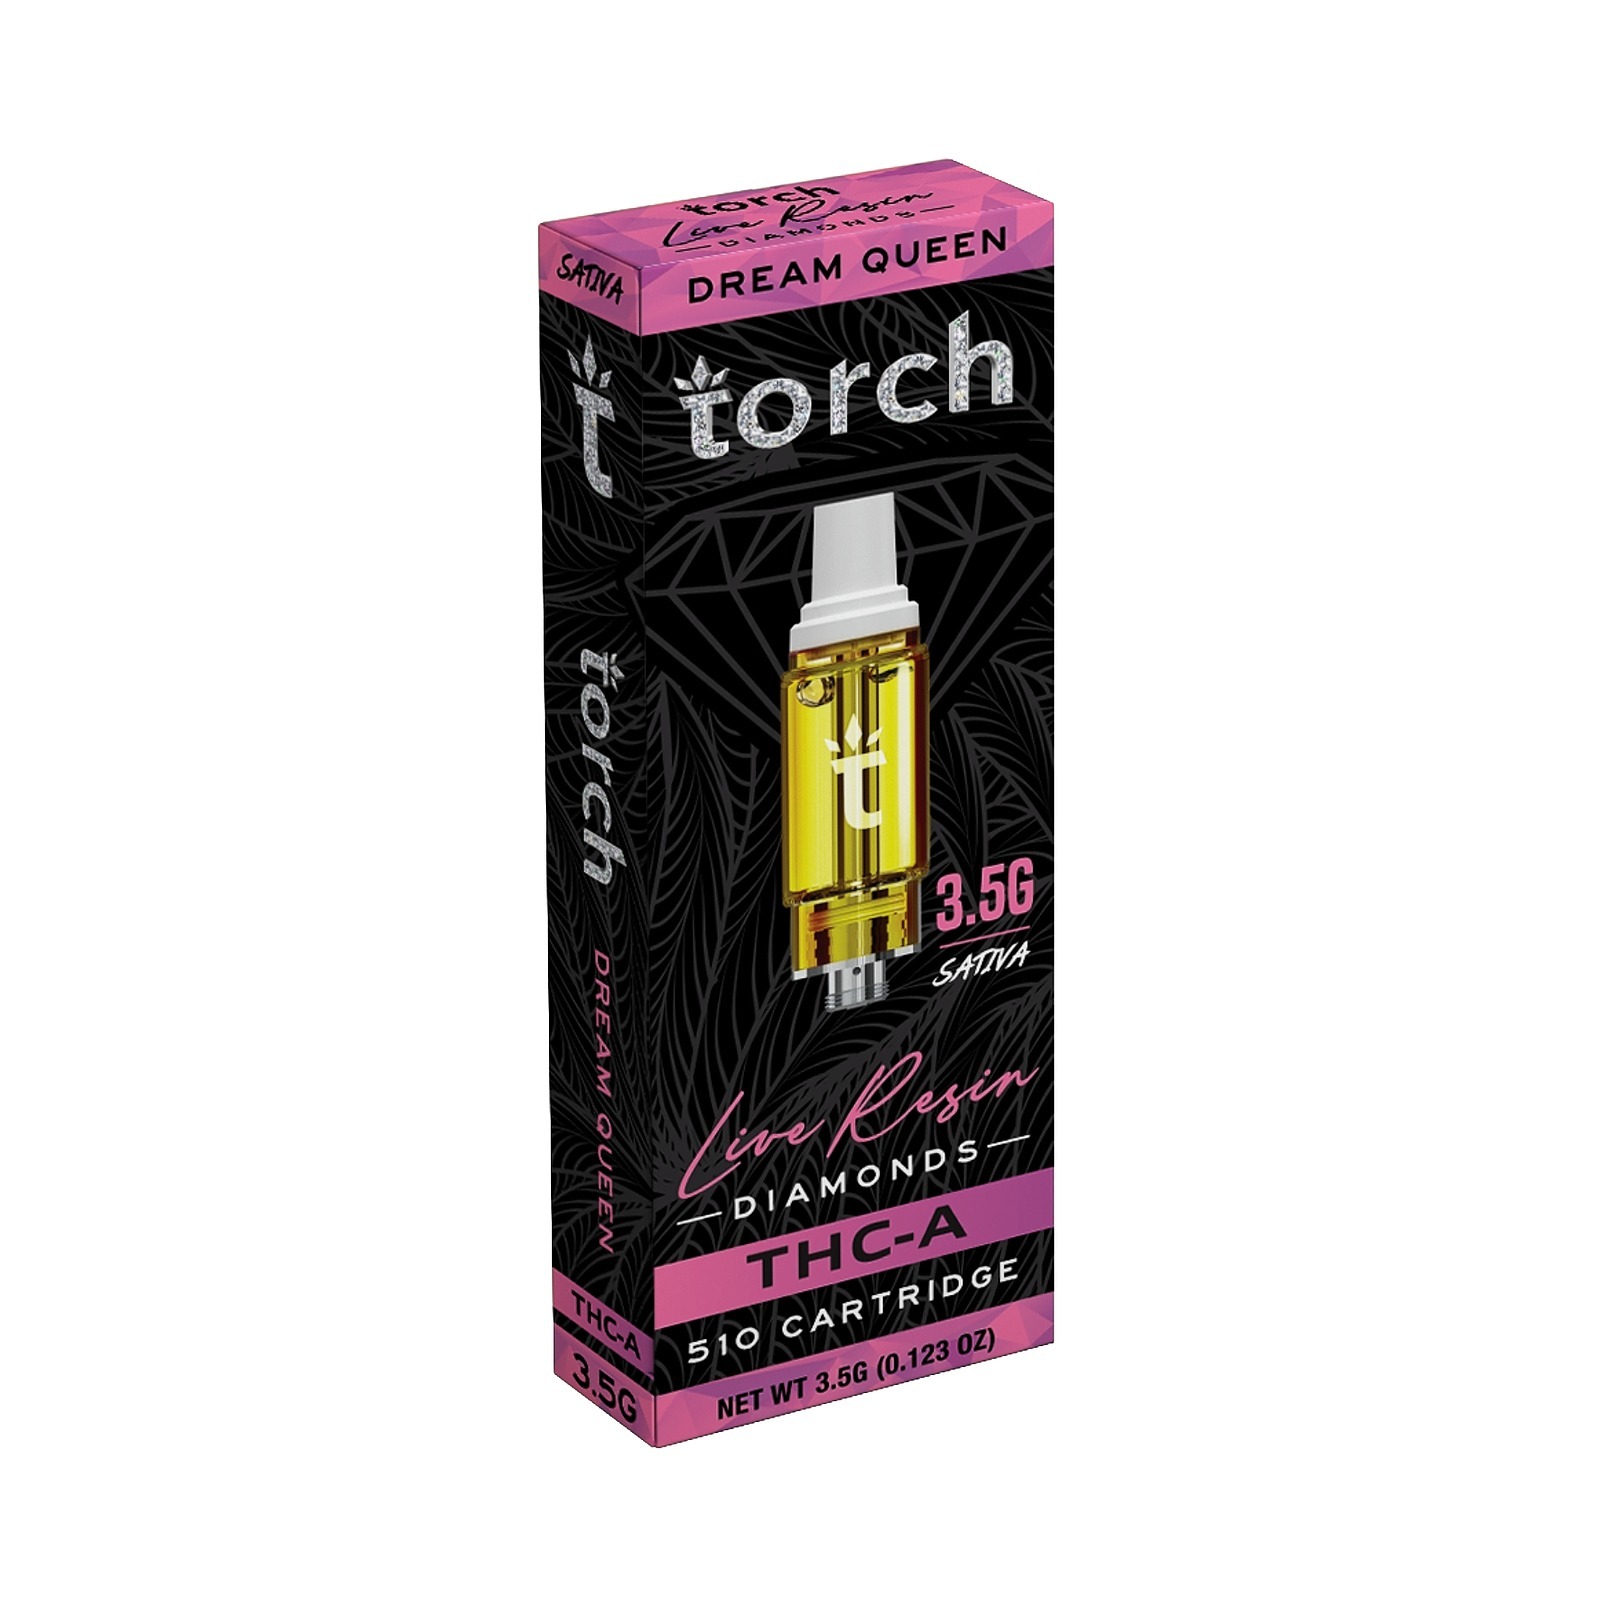 Aventus 8 Torch Dream Queen Thc A Live Resin Diamonds 510 Cartridge 35g Sativa Leafly 2681